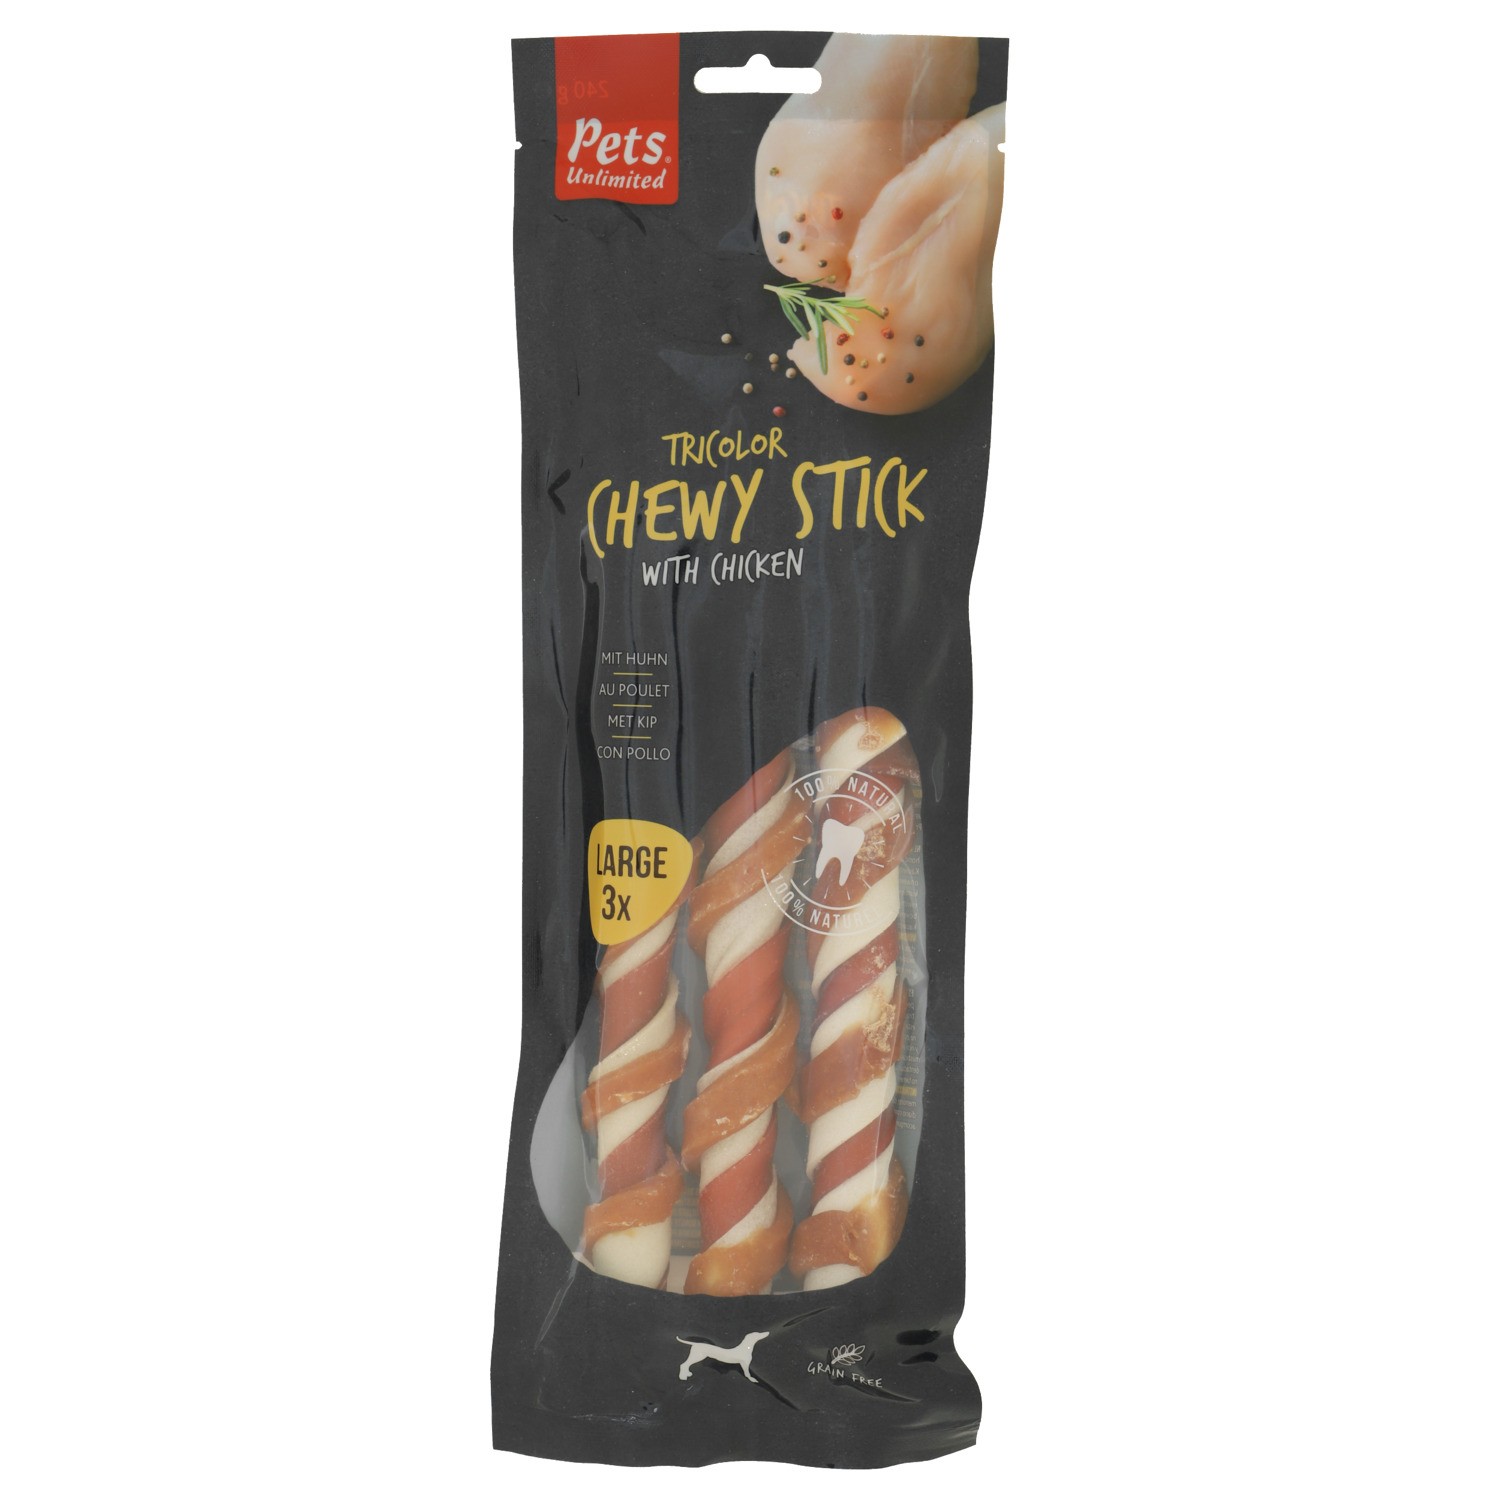 Tricolor Chewy Sticks Large 3st